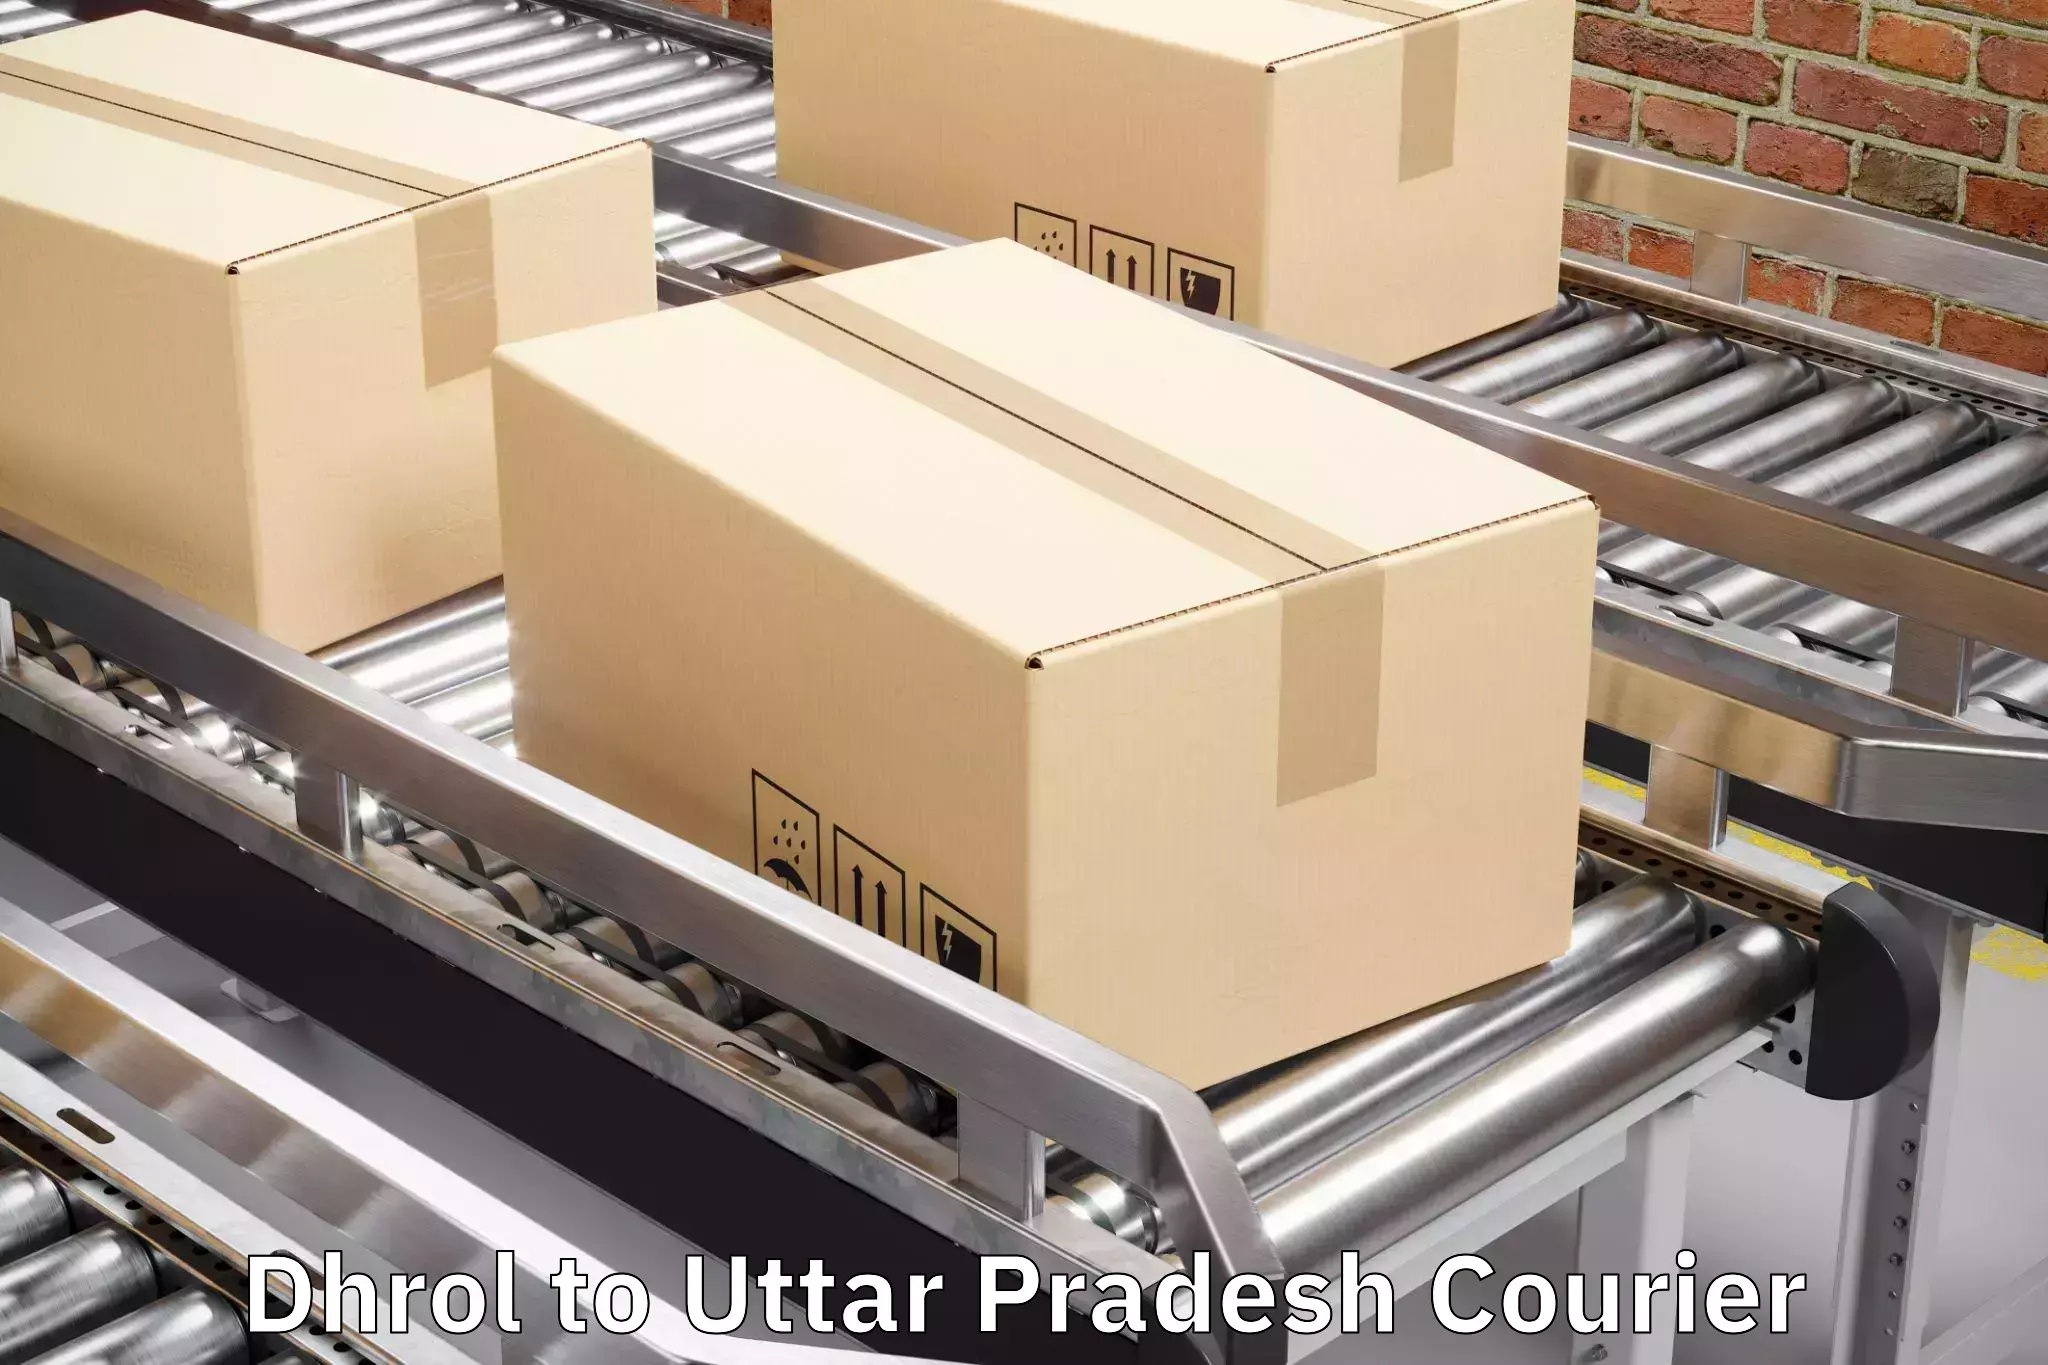 Baggage shipping schedule Dhrol to Allahabad